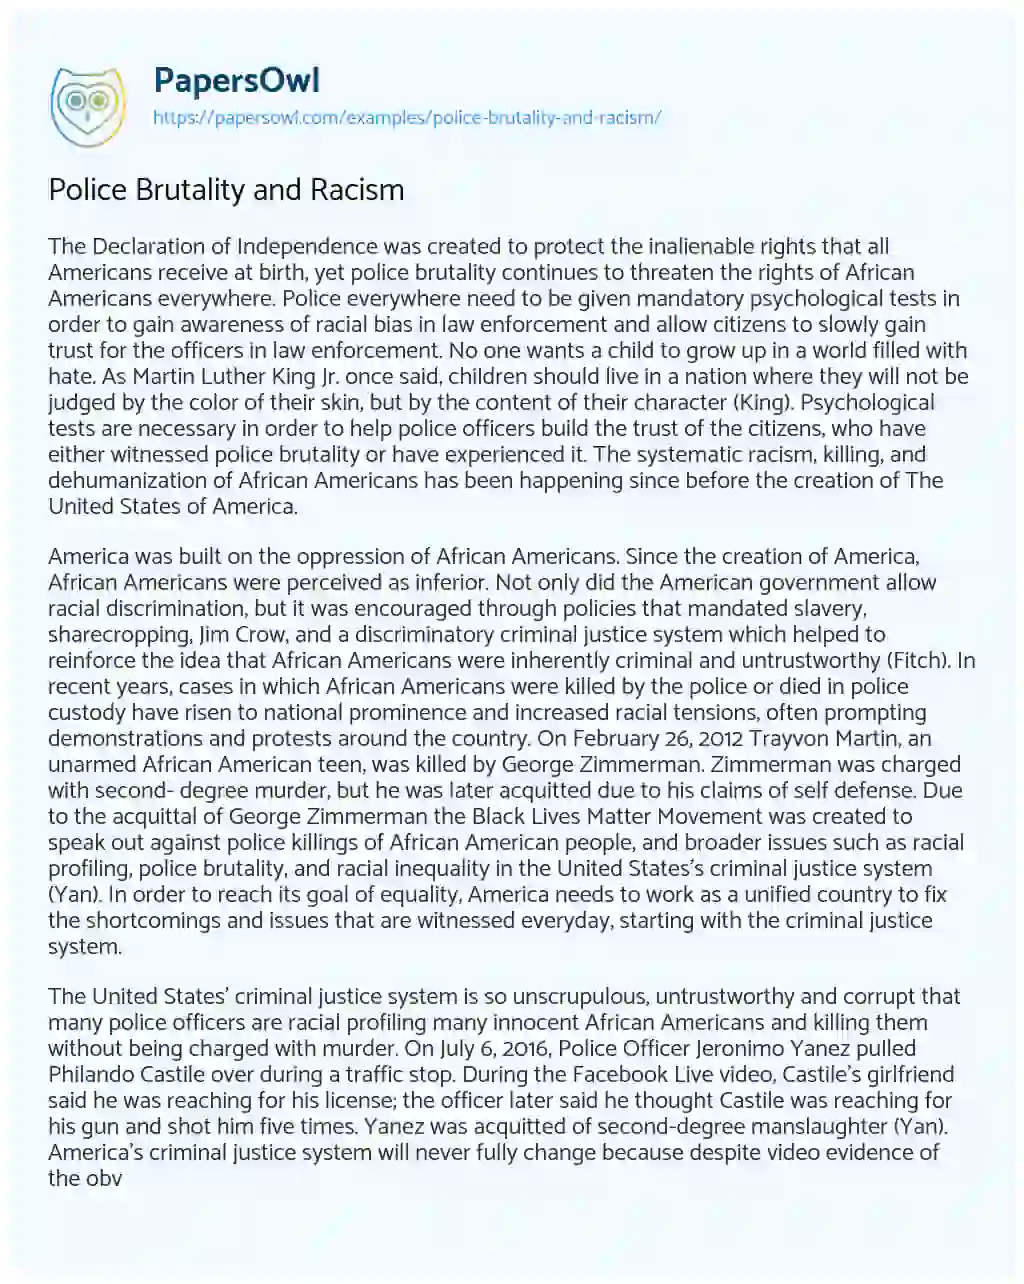 Police Brutality and Racism essay